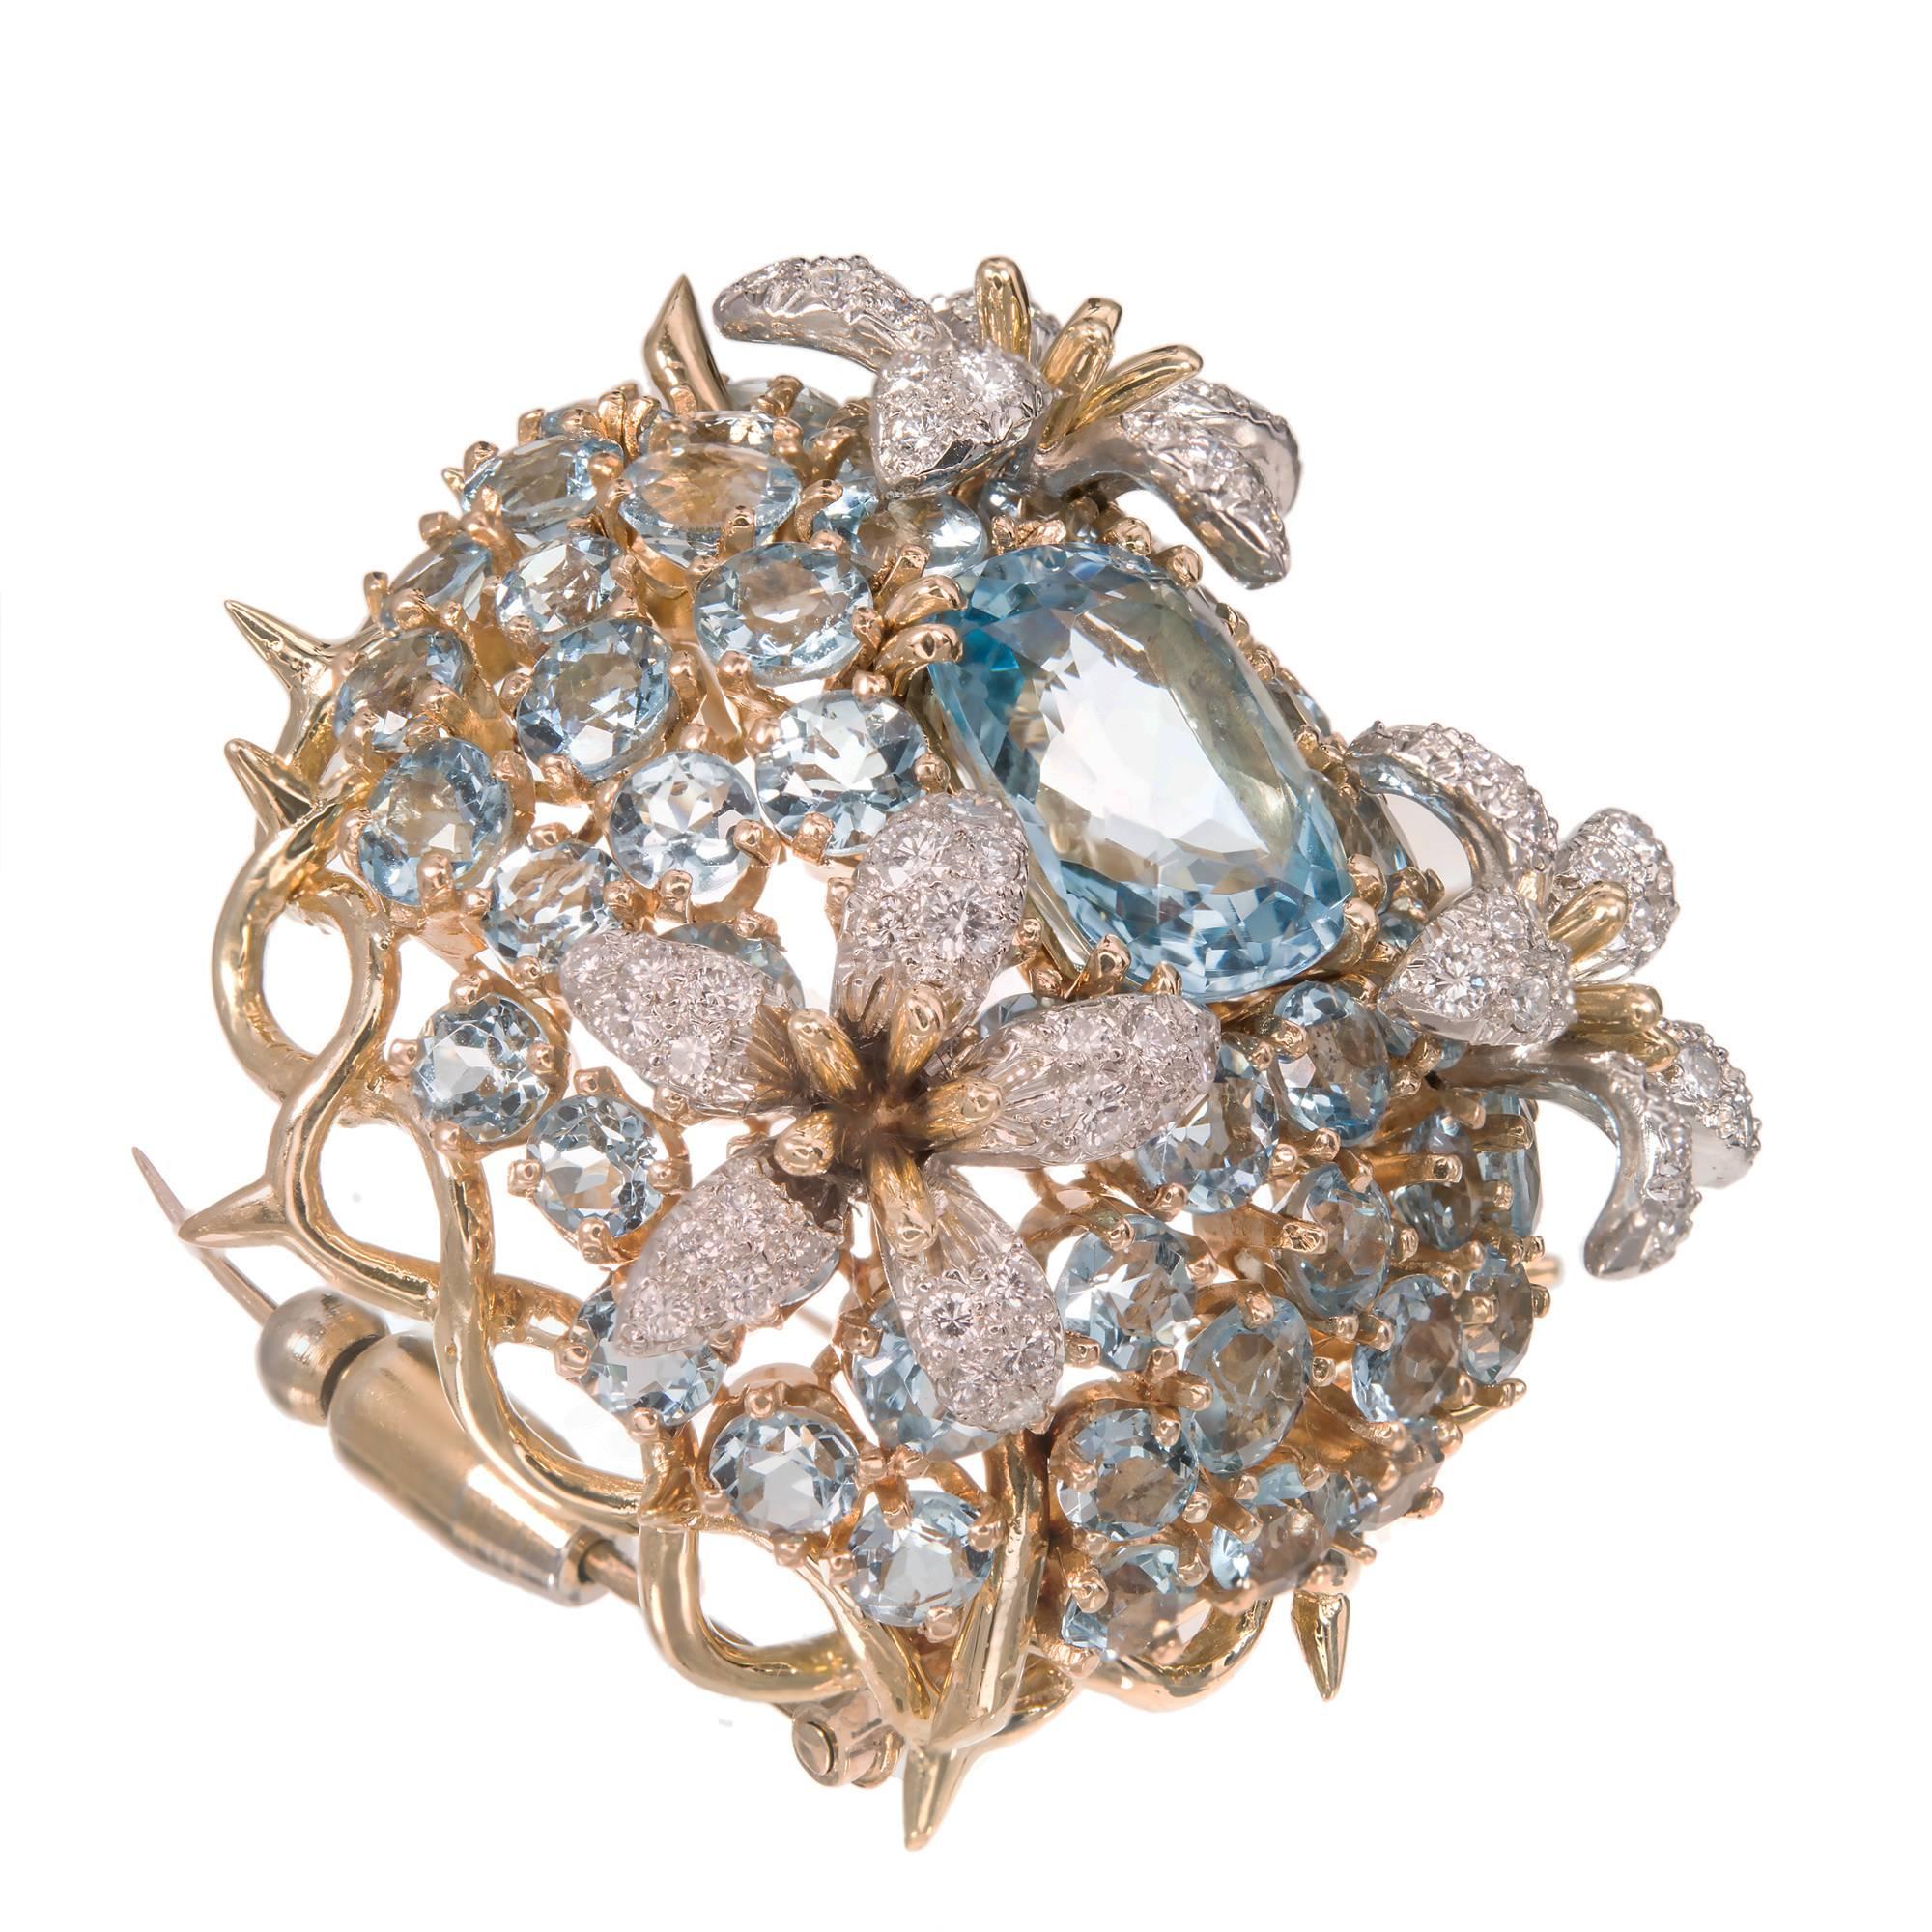 Tiffany & Co. original Schlumberger rare “Cousins” design aqua 18k yellow gold pin with bright blue aquas and three white gold flowers pave set with diamonds. 
Rare iconic Cousins Schlumberger Tiffany pin,seldom seen in Aqua,Superb example of The